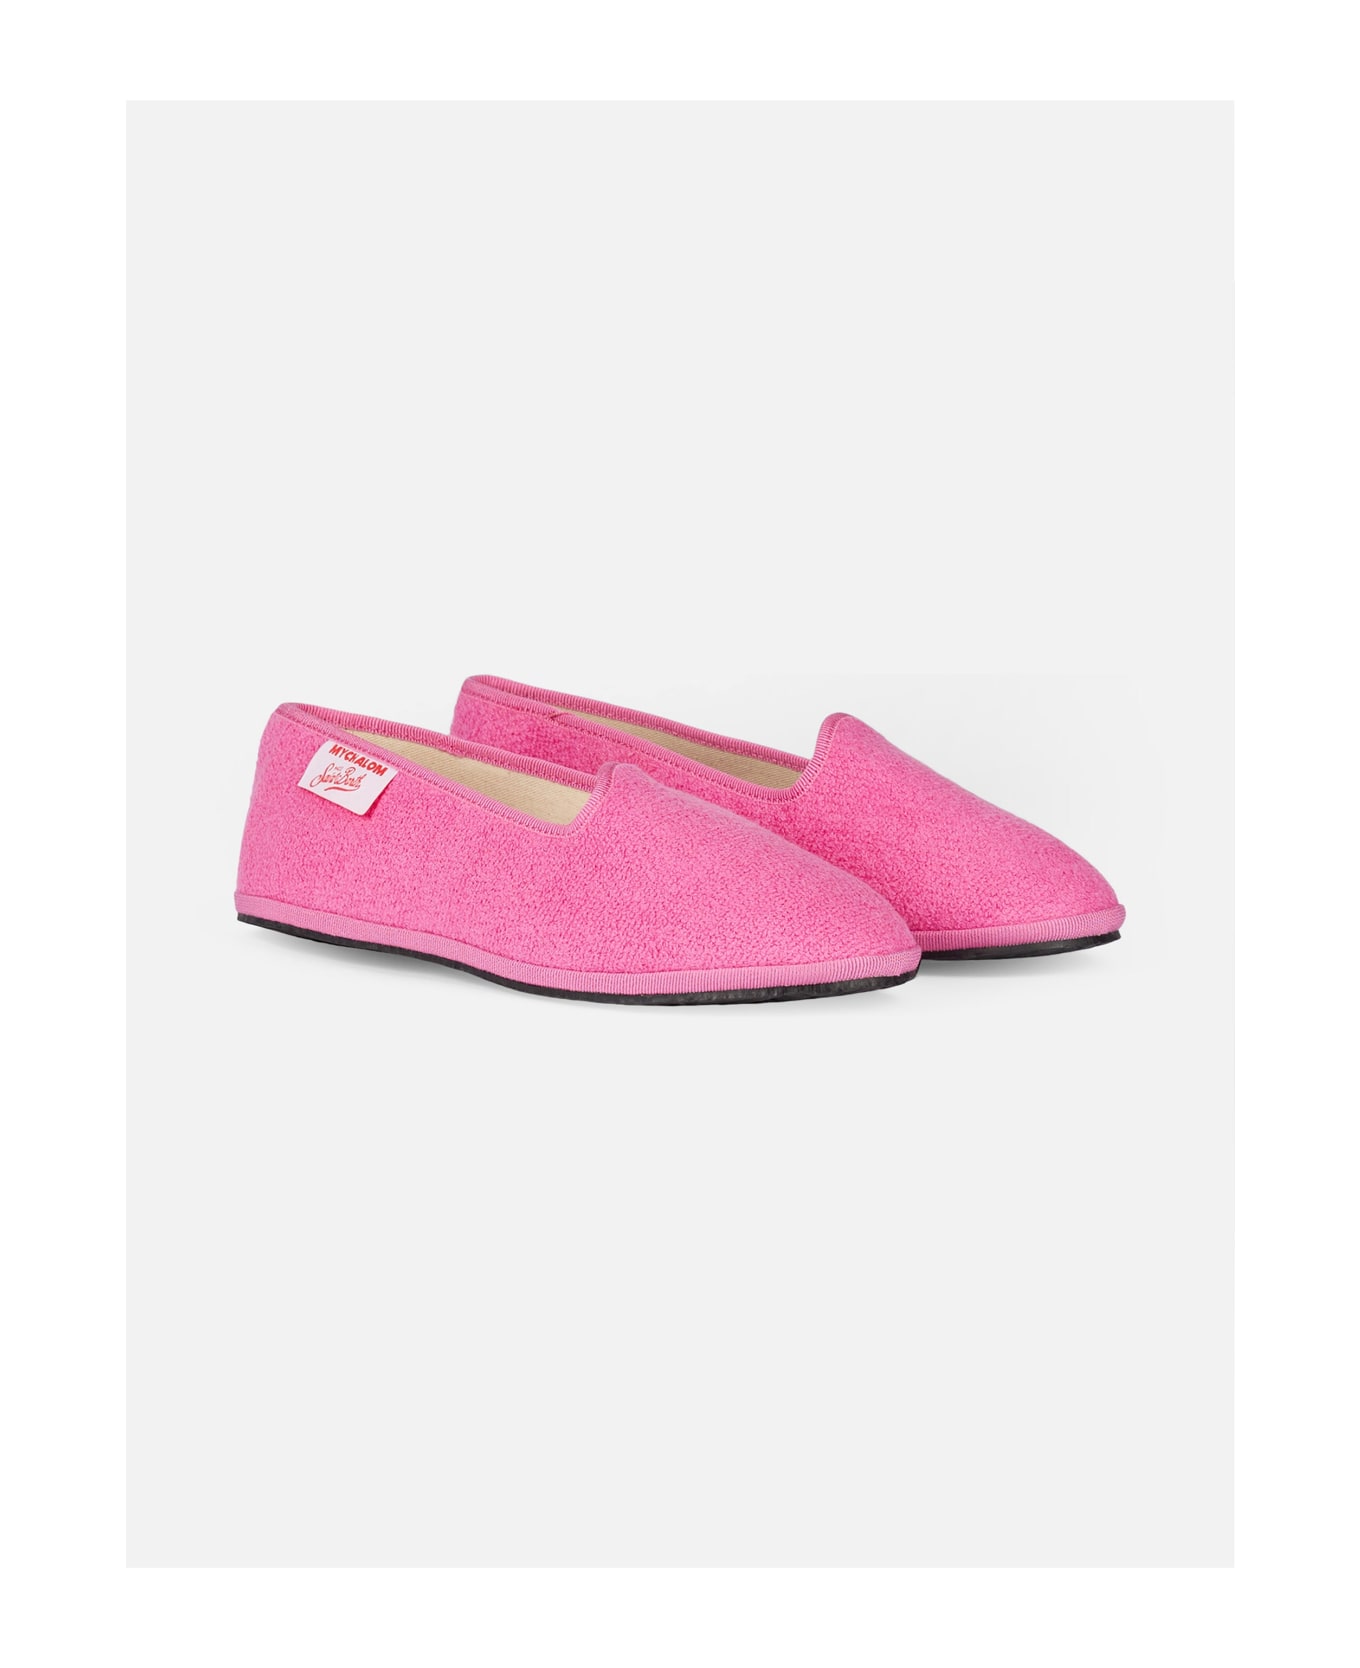 MC2 Saint Barth Woman Pink Terry Slipper Loafer | My Chalom Special Edition - PINK フラットシューズ